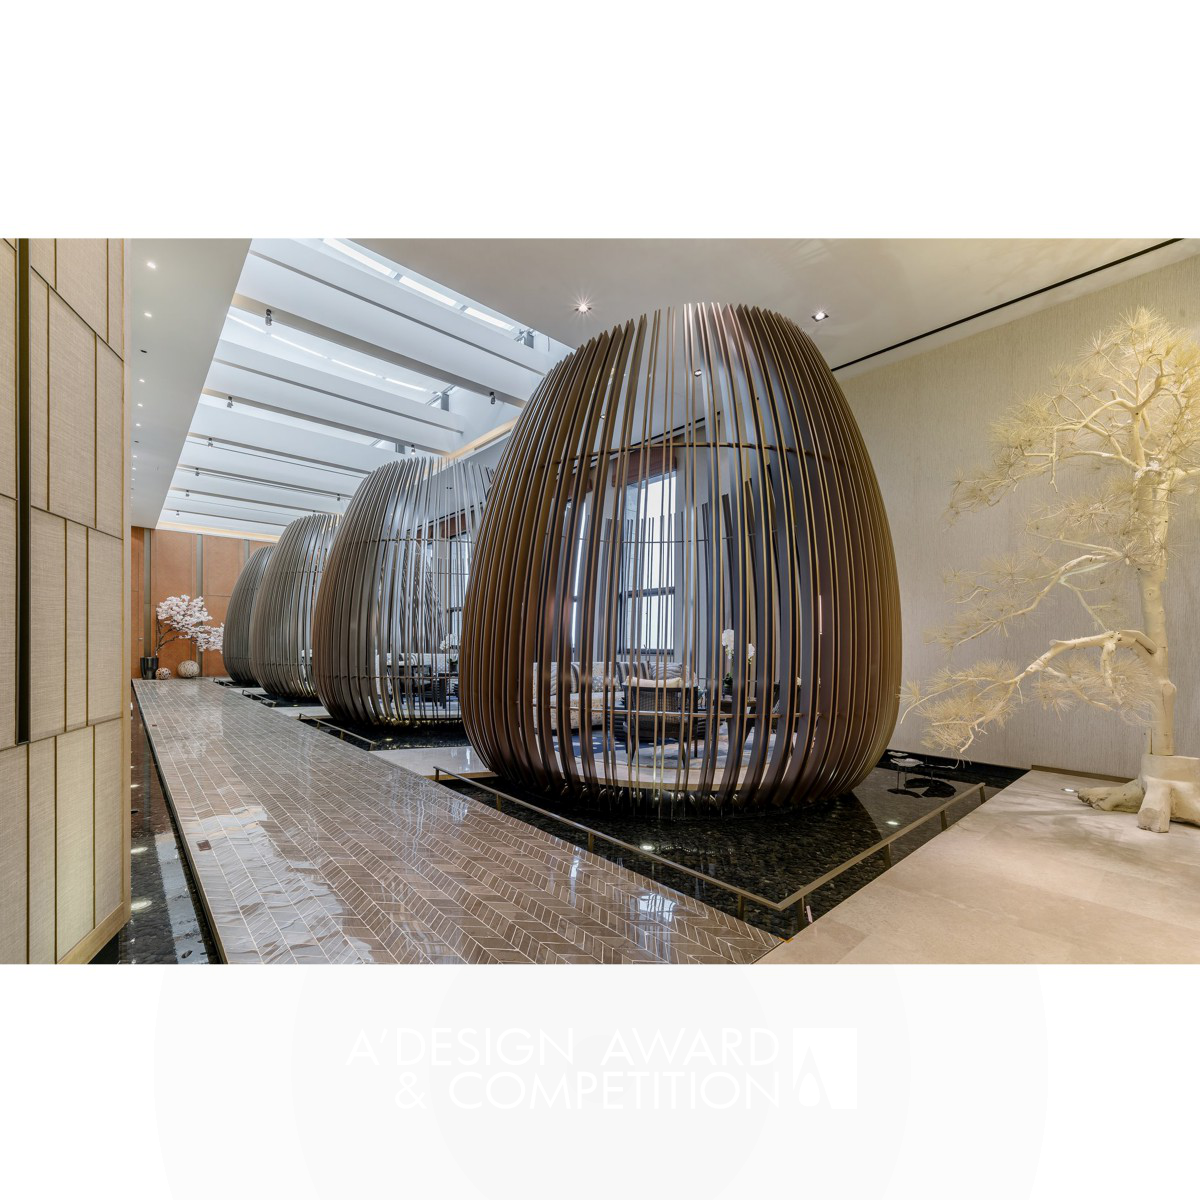 Birds Nest Sales Center Sales Center by Kris Lin Silver Construction and Real Estate Projects Design Award Winner 2019 